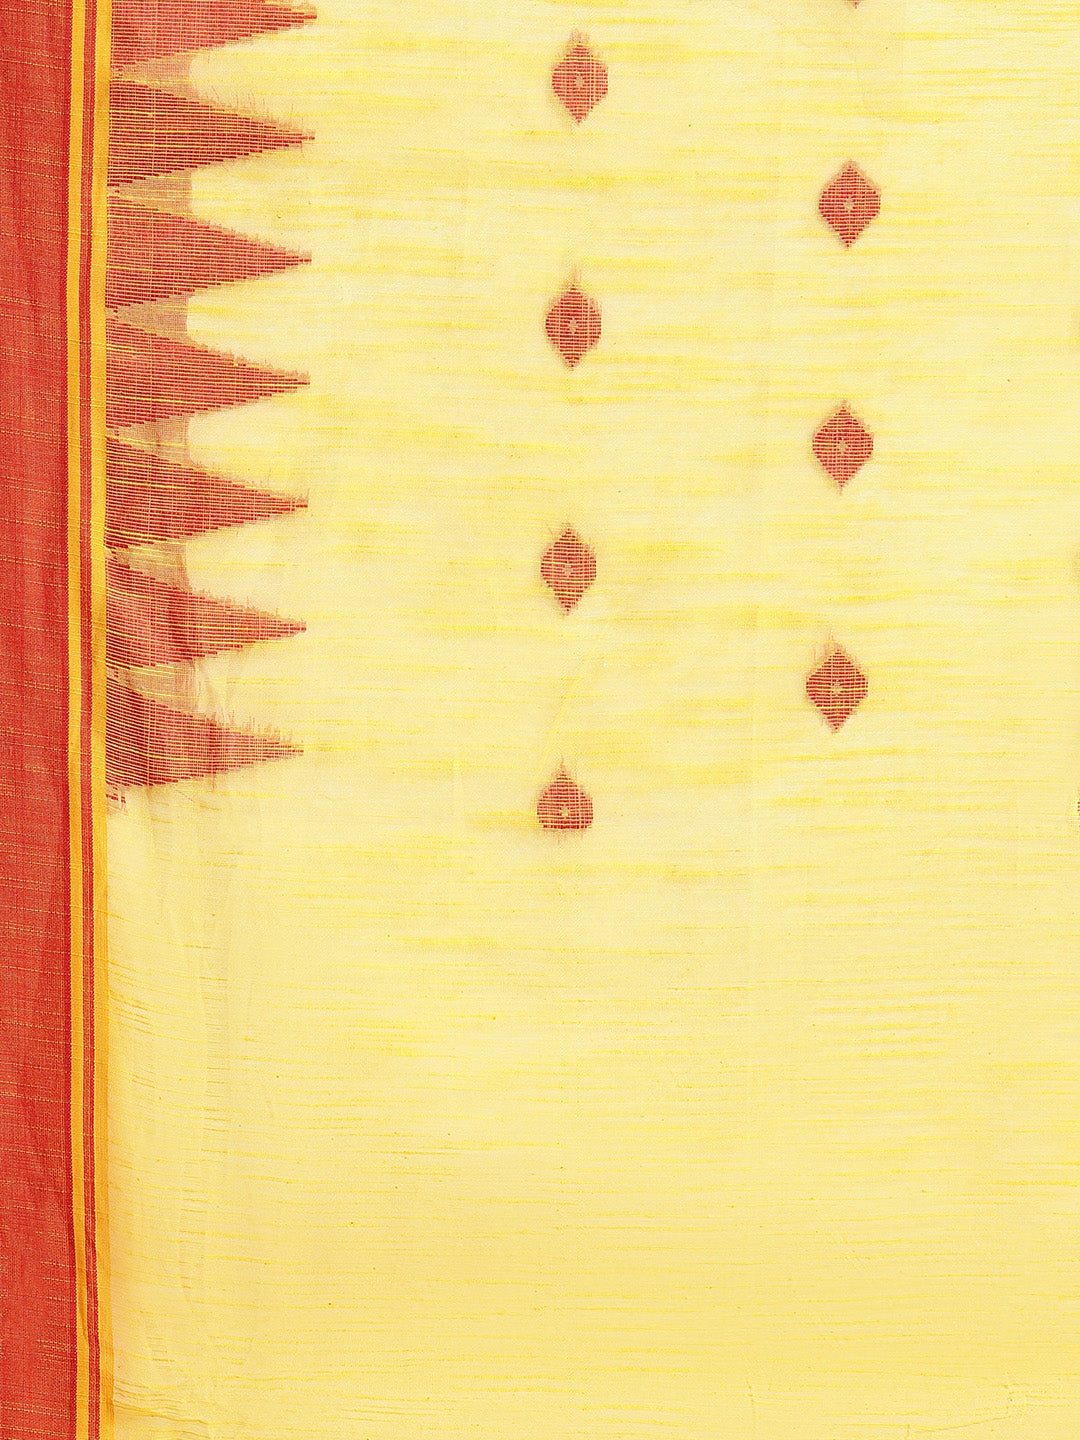 Yellow and Red, Kalakari India Ikat Silk Cotton Woven Design Saree with Blouse SHBESA0027-Saree-Kalakari India-SHBESA0027-Bengal, Cotton, Geographical Indication, Hand Crafted, Heritage Prints, Ikkat, Natural Dyes, Red, Sarees, Sustainable Fabrics, Woven, Yellow-[Linen,Ethnic,wear,Fashionista,Handloom,Handicraft,Indigo,blockprint,block,print,Cotton,Chanderi,Blue, latest,classy,party,bollywood,trendy,summer,style,traditional,formal,elegant,unique,style,hand,block,print, dabu,booti,gift,present,gl